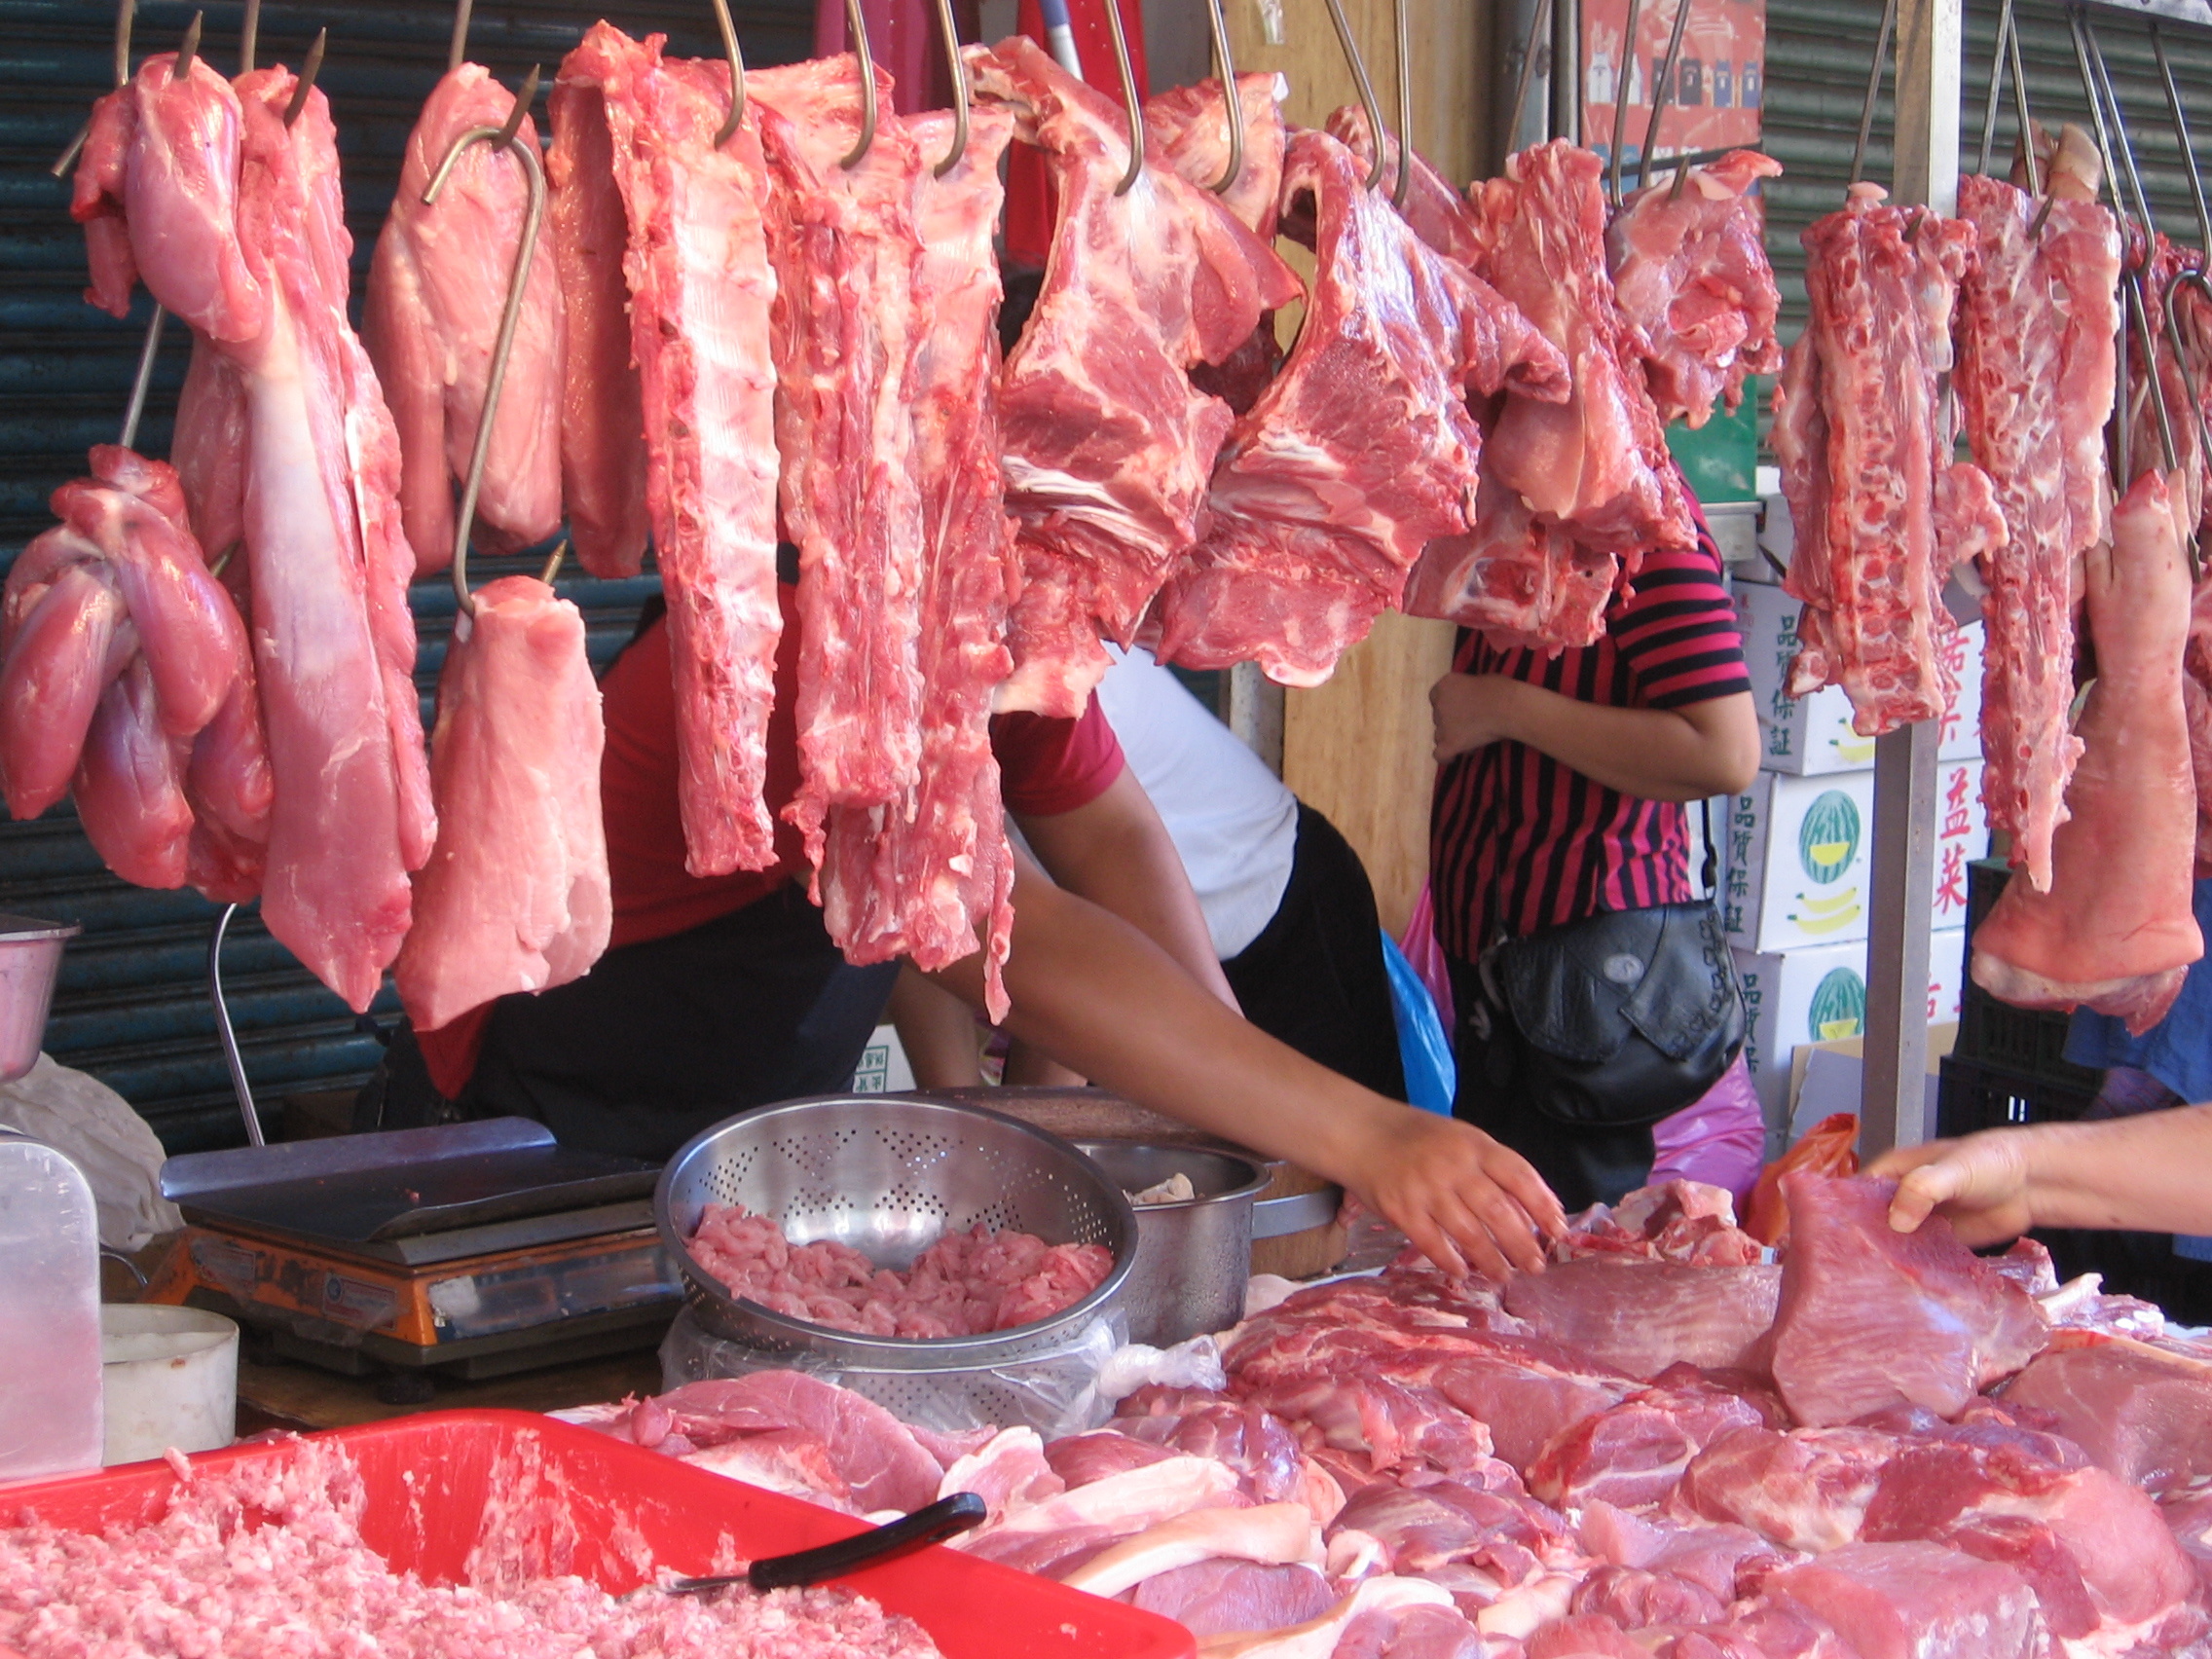 Open air meat market in Asia